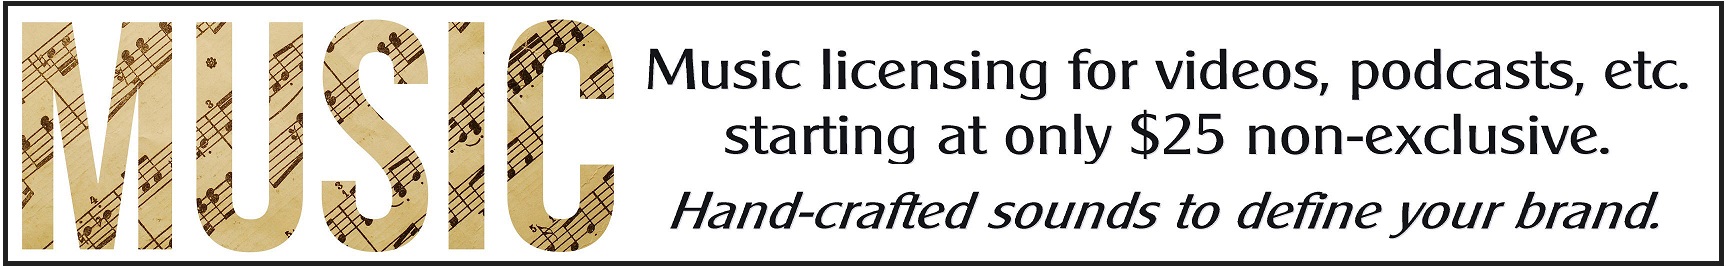 Music licensing for videos, podcasts, etc. starting at only $25 non-exclusive. Hand-crafted sounds to define your brand.